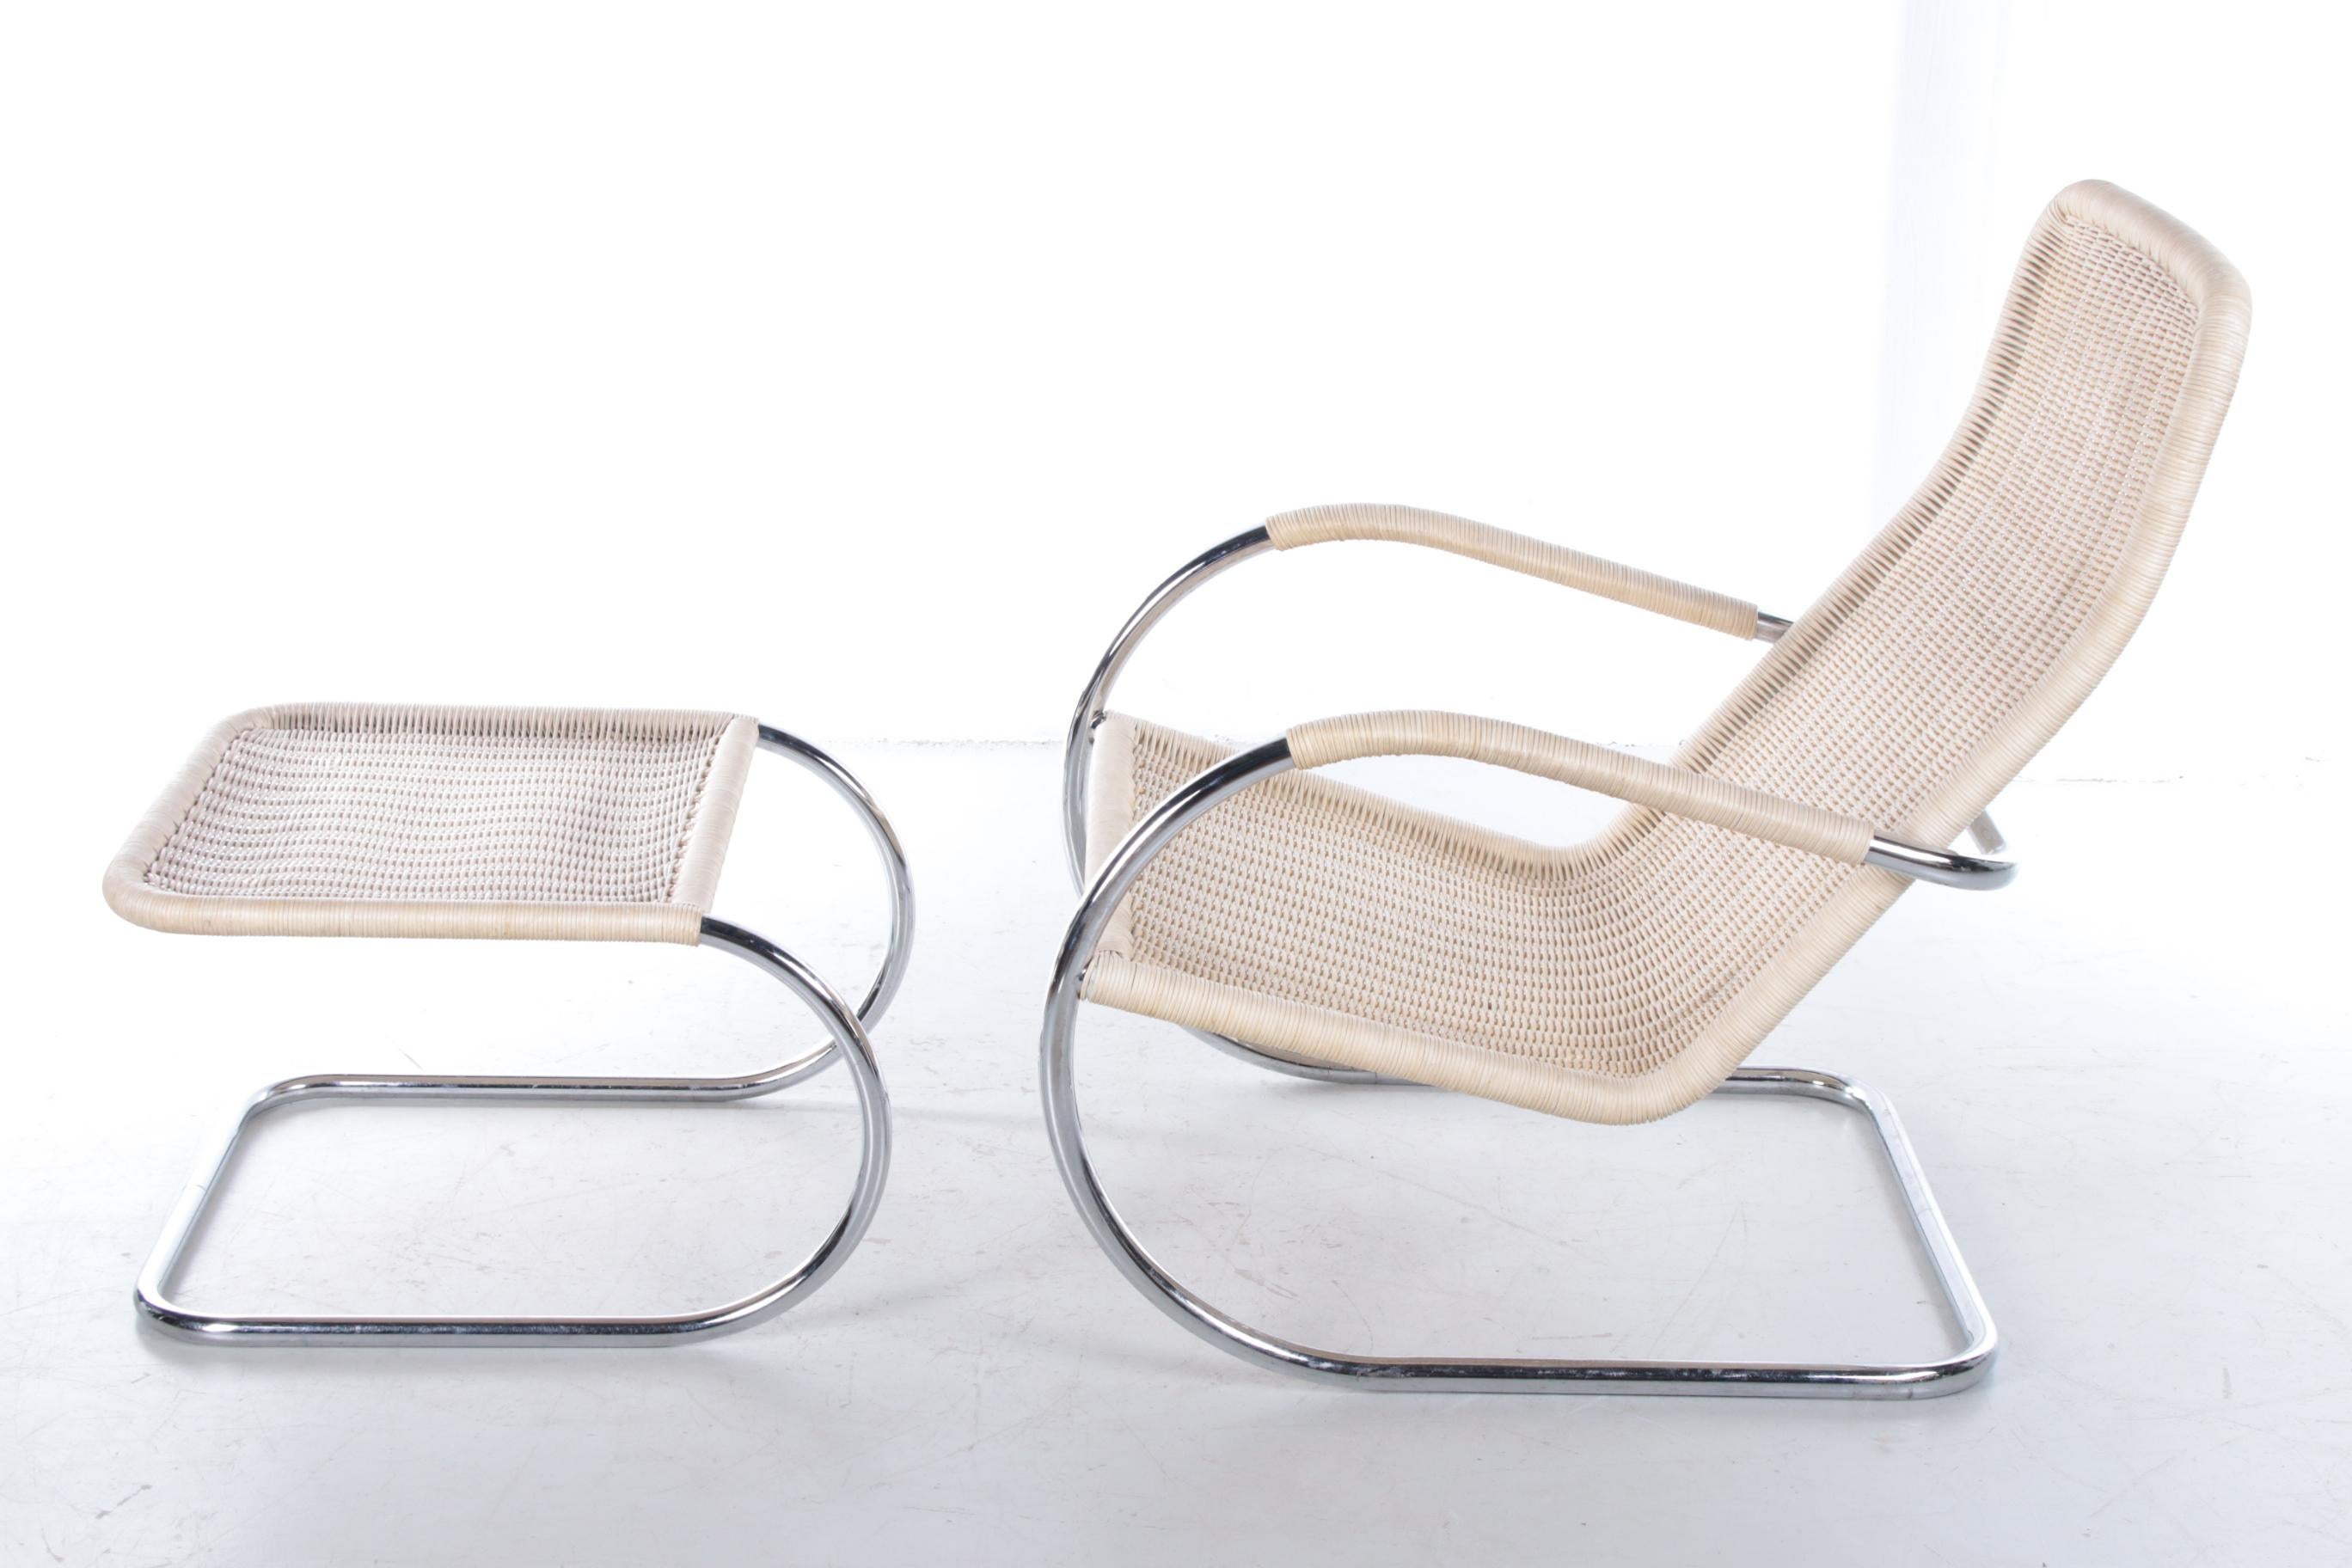 Steel Vintage Relax Chair with Ottoman from Tecta, Design by Anton Lorenz Germany